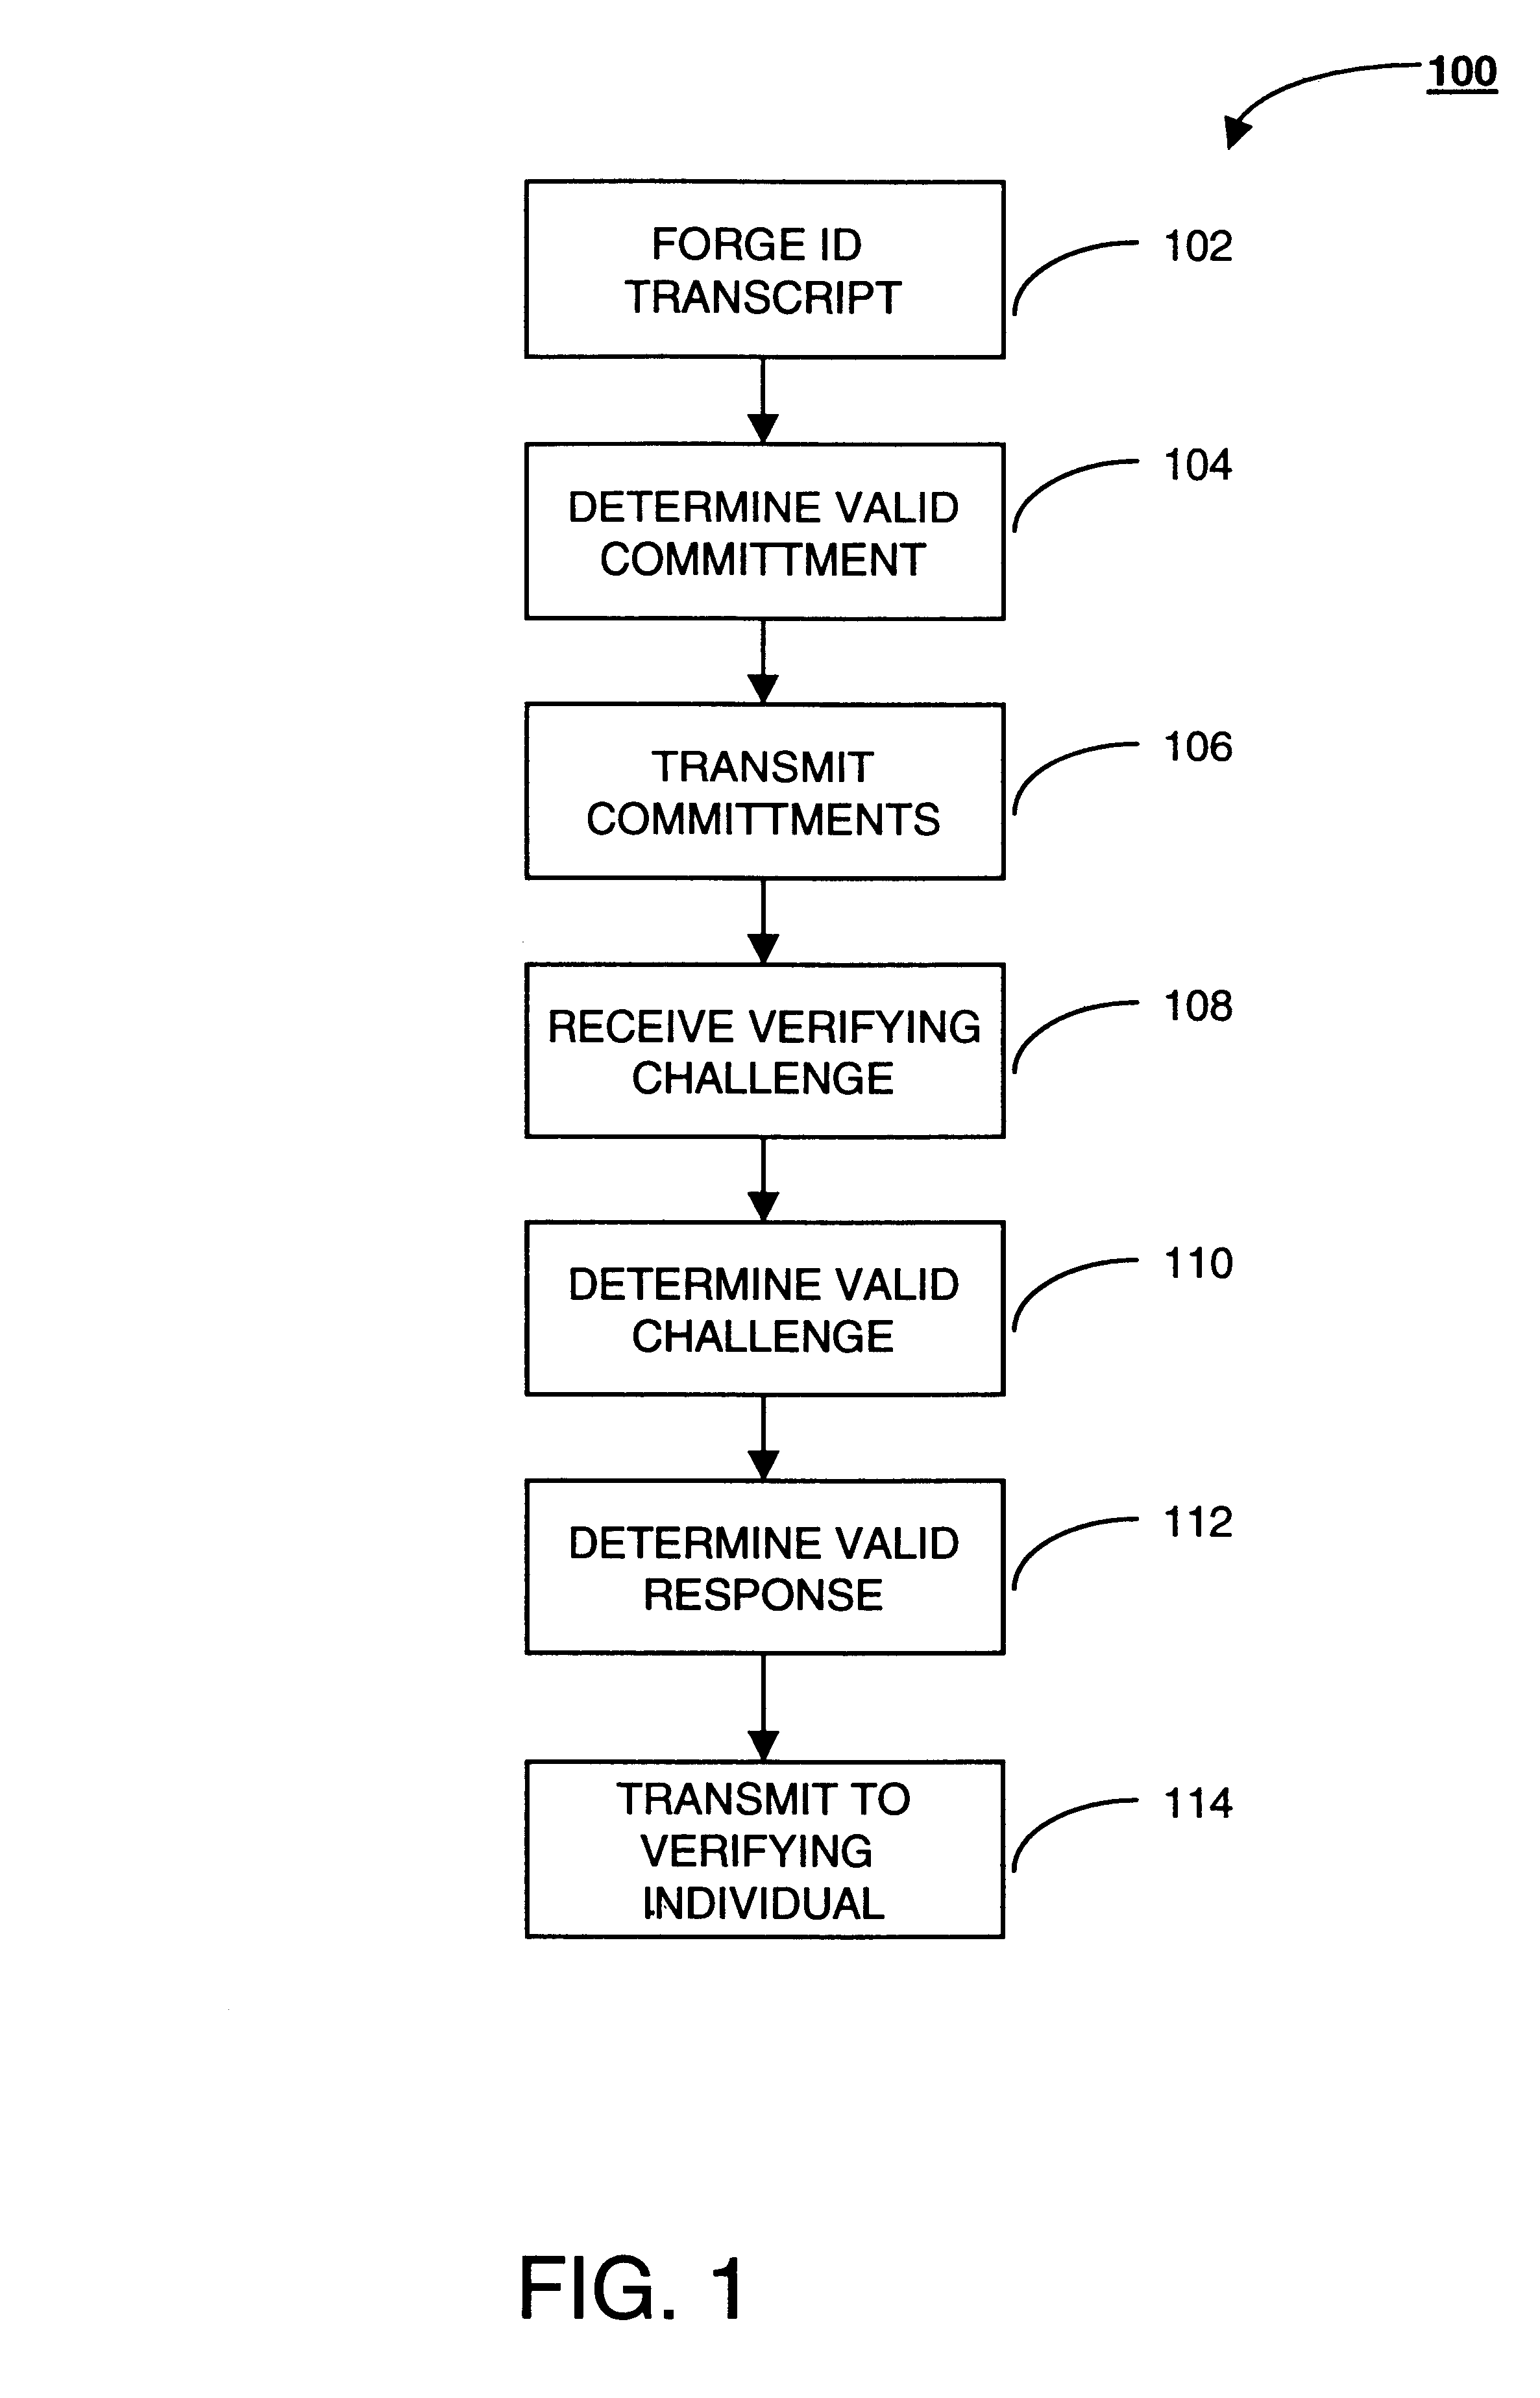 Method for enabling privacy and trust in electronic communities